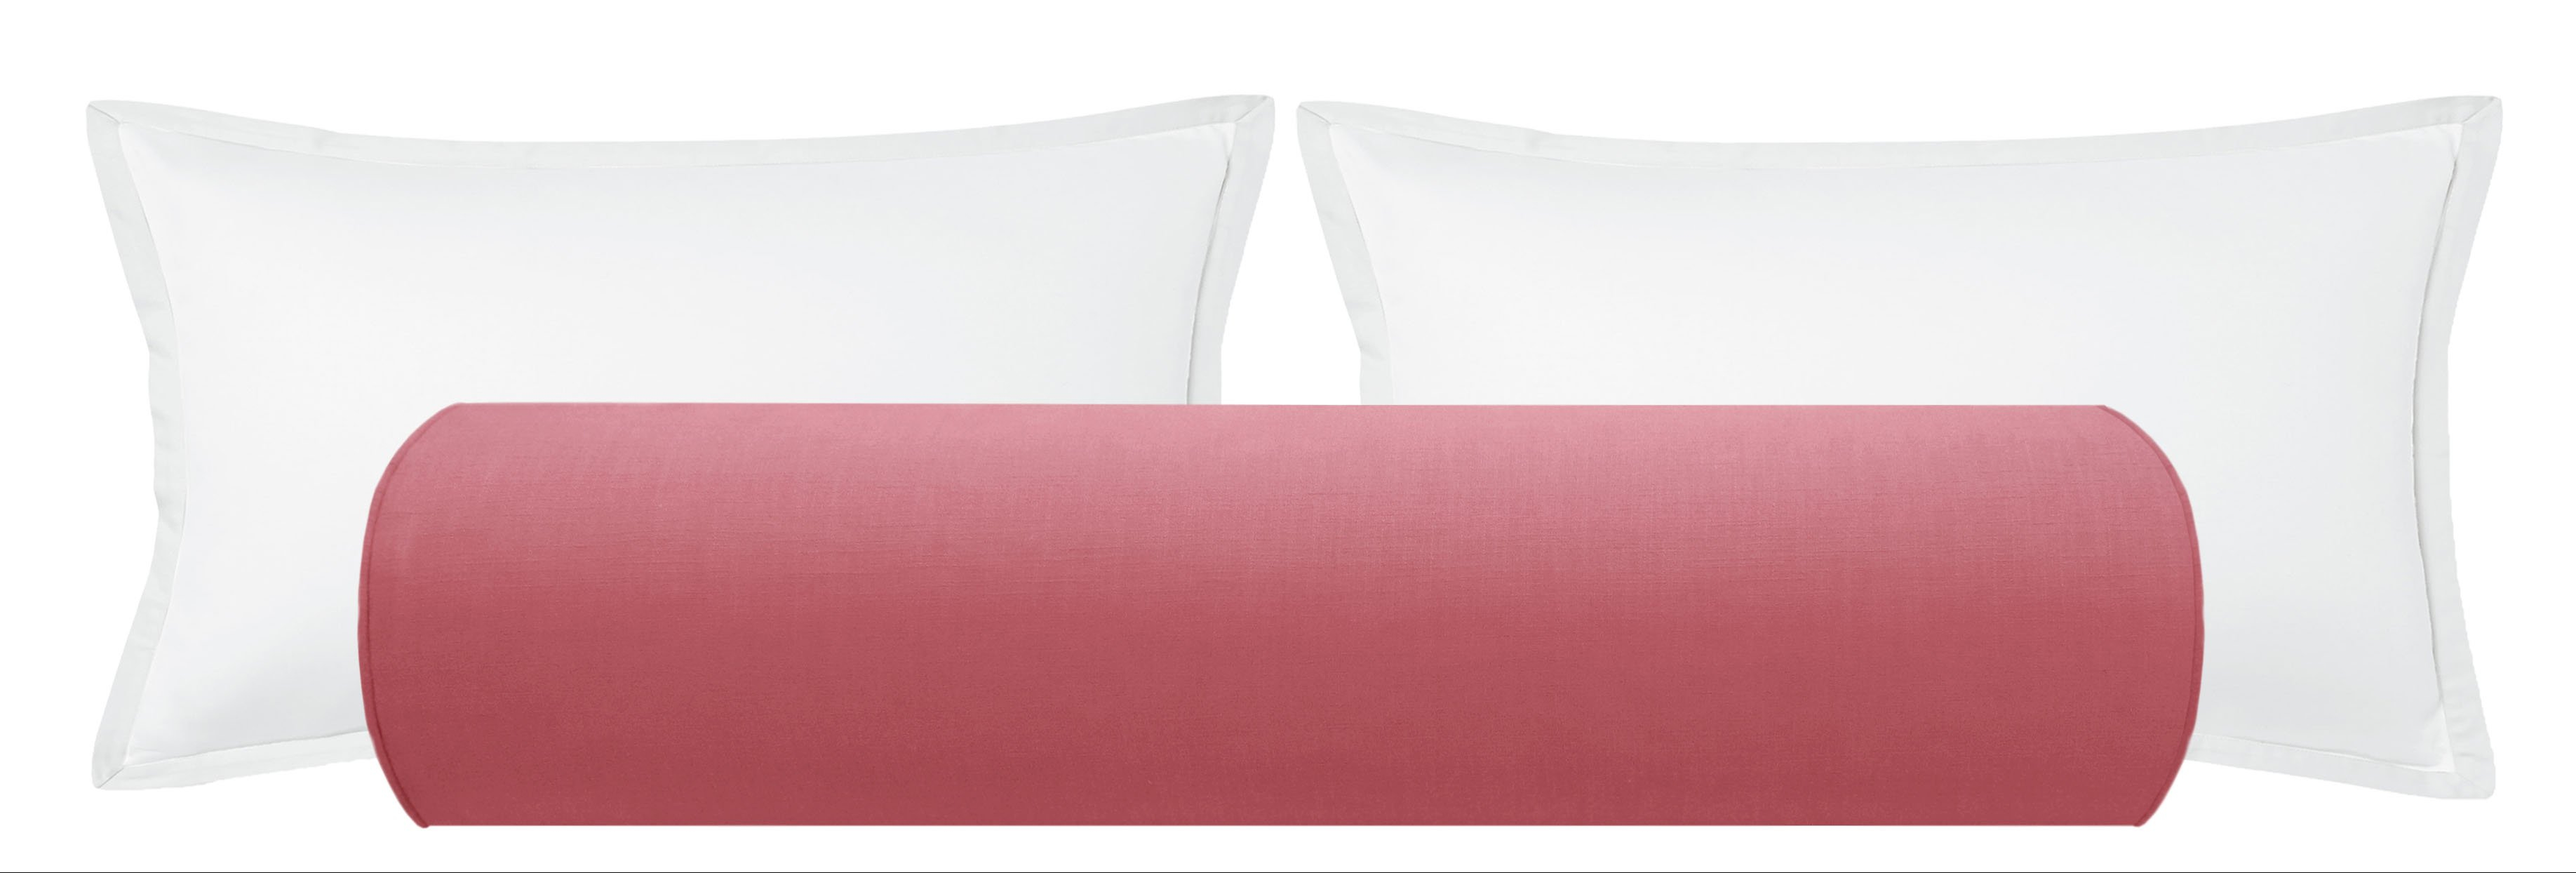 The Bolster :: Classic Linen // Rosé Pink (new) - KING // 9" X 48" - Little Design Company